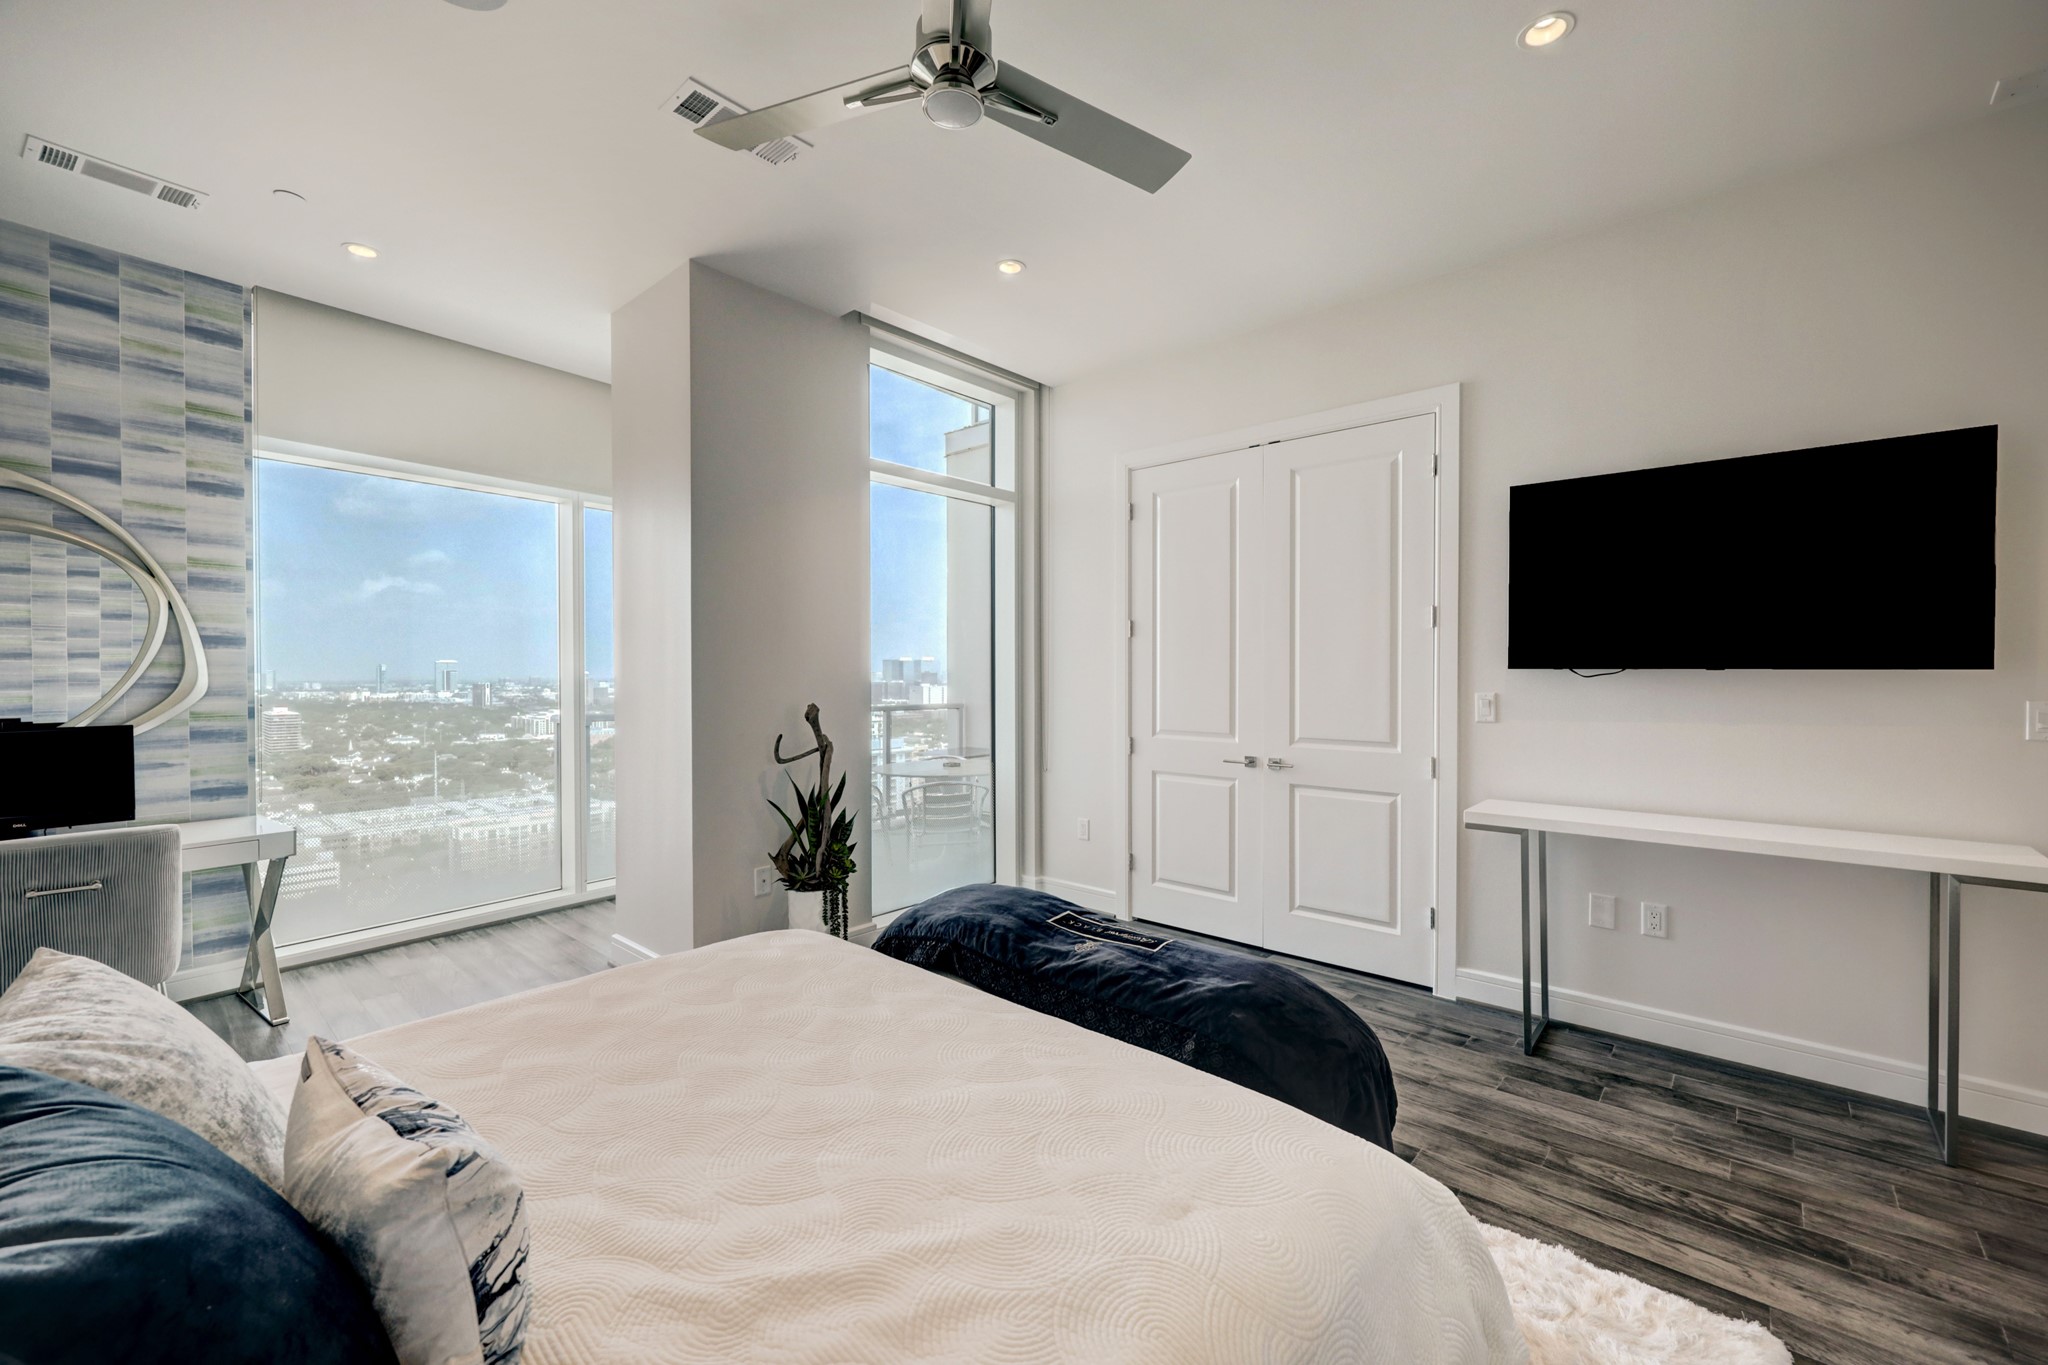 Another view of the spacious master bedroom with plenty of natural light and amazing views